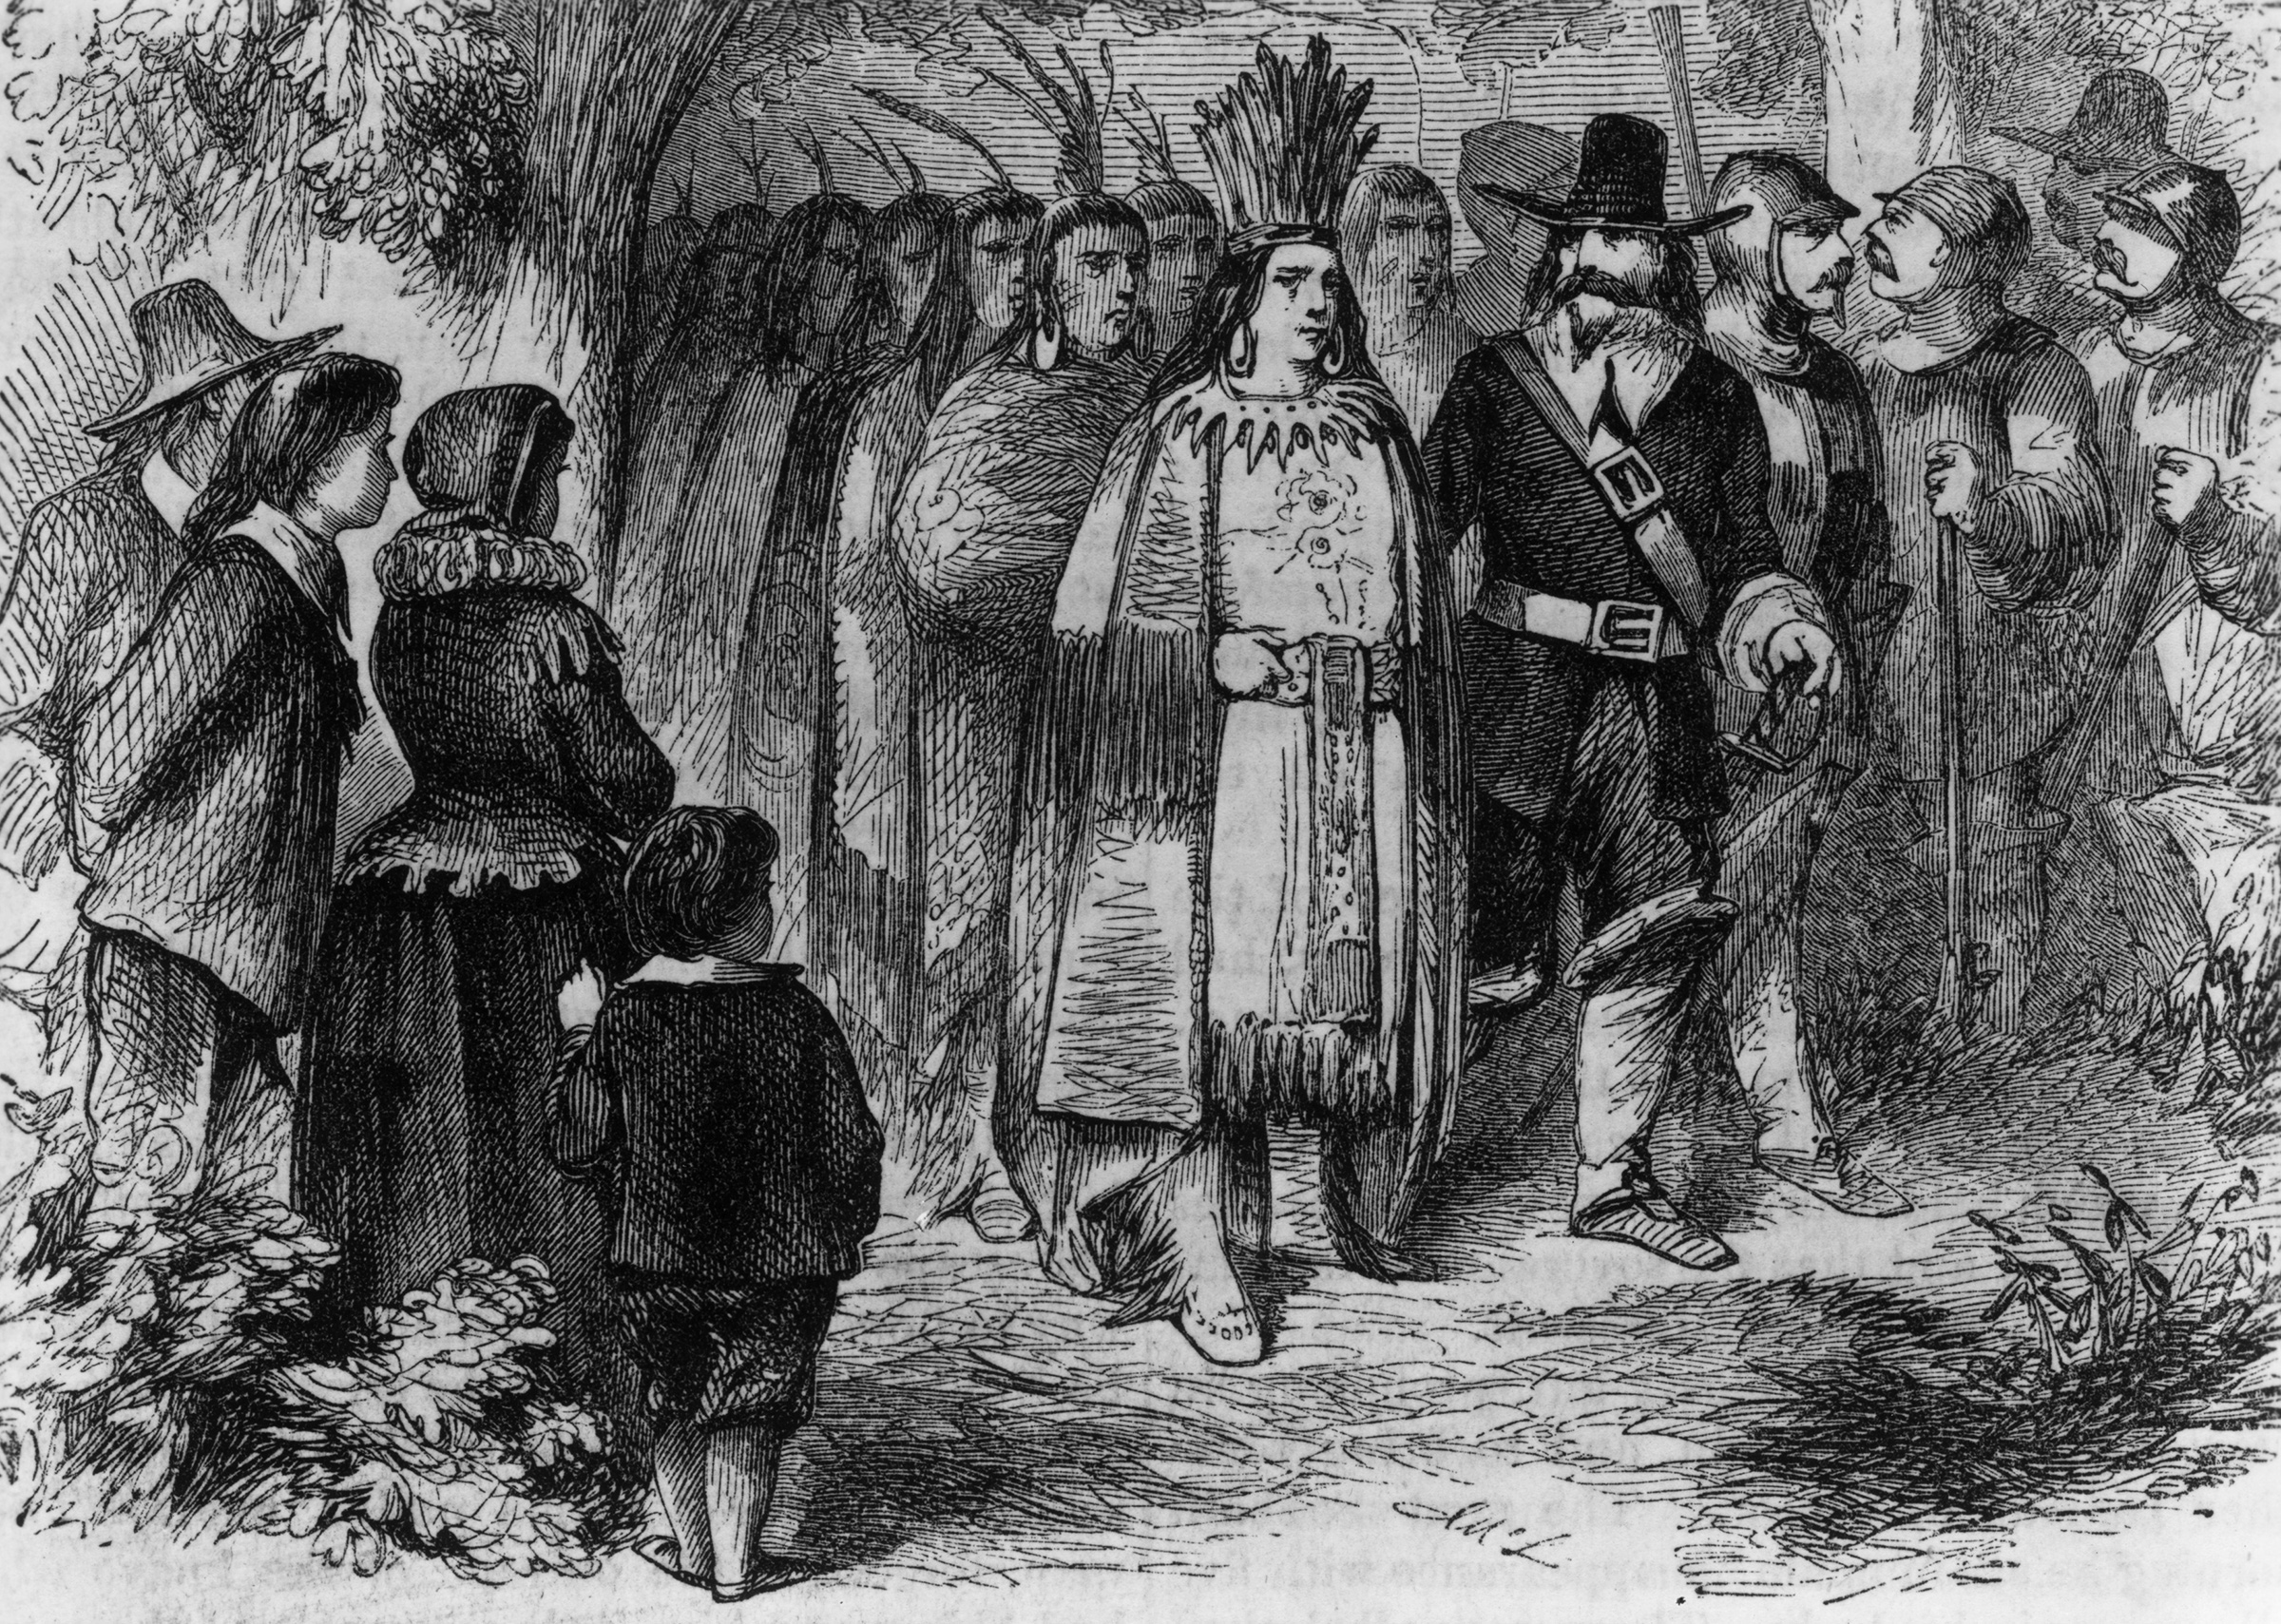 Circa 1621, Massasoit or Ousamequin, chief of the Wampanoag of Massachusetts and Rhode Island, pays a visit to the Pilgrims' camp at Plymouth Colony with his warriors after signing the earliest recorded treaty in New England (MPI/Getty Images)